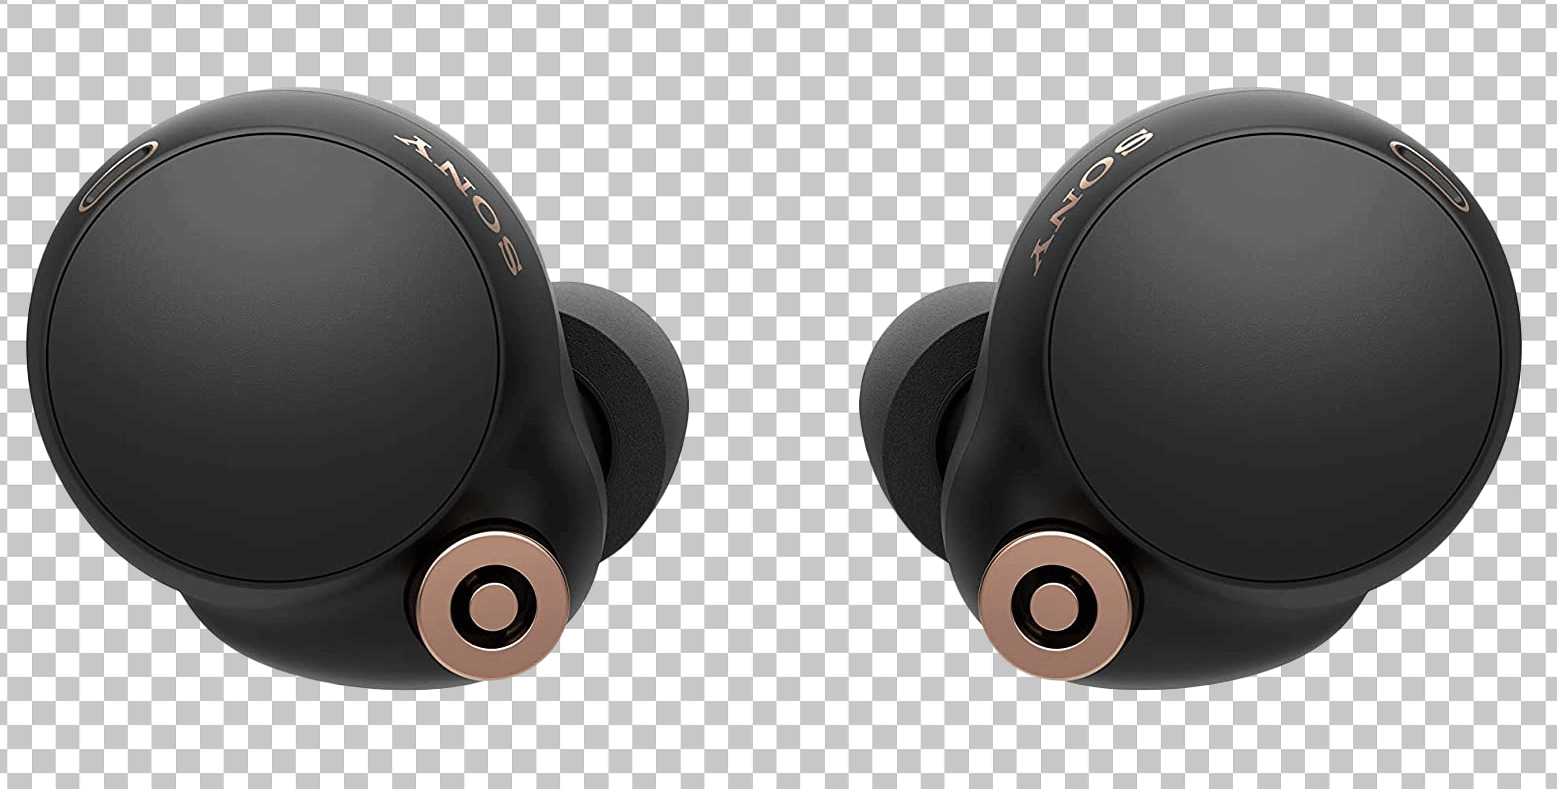 Sony WF earbuds PNG image